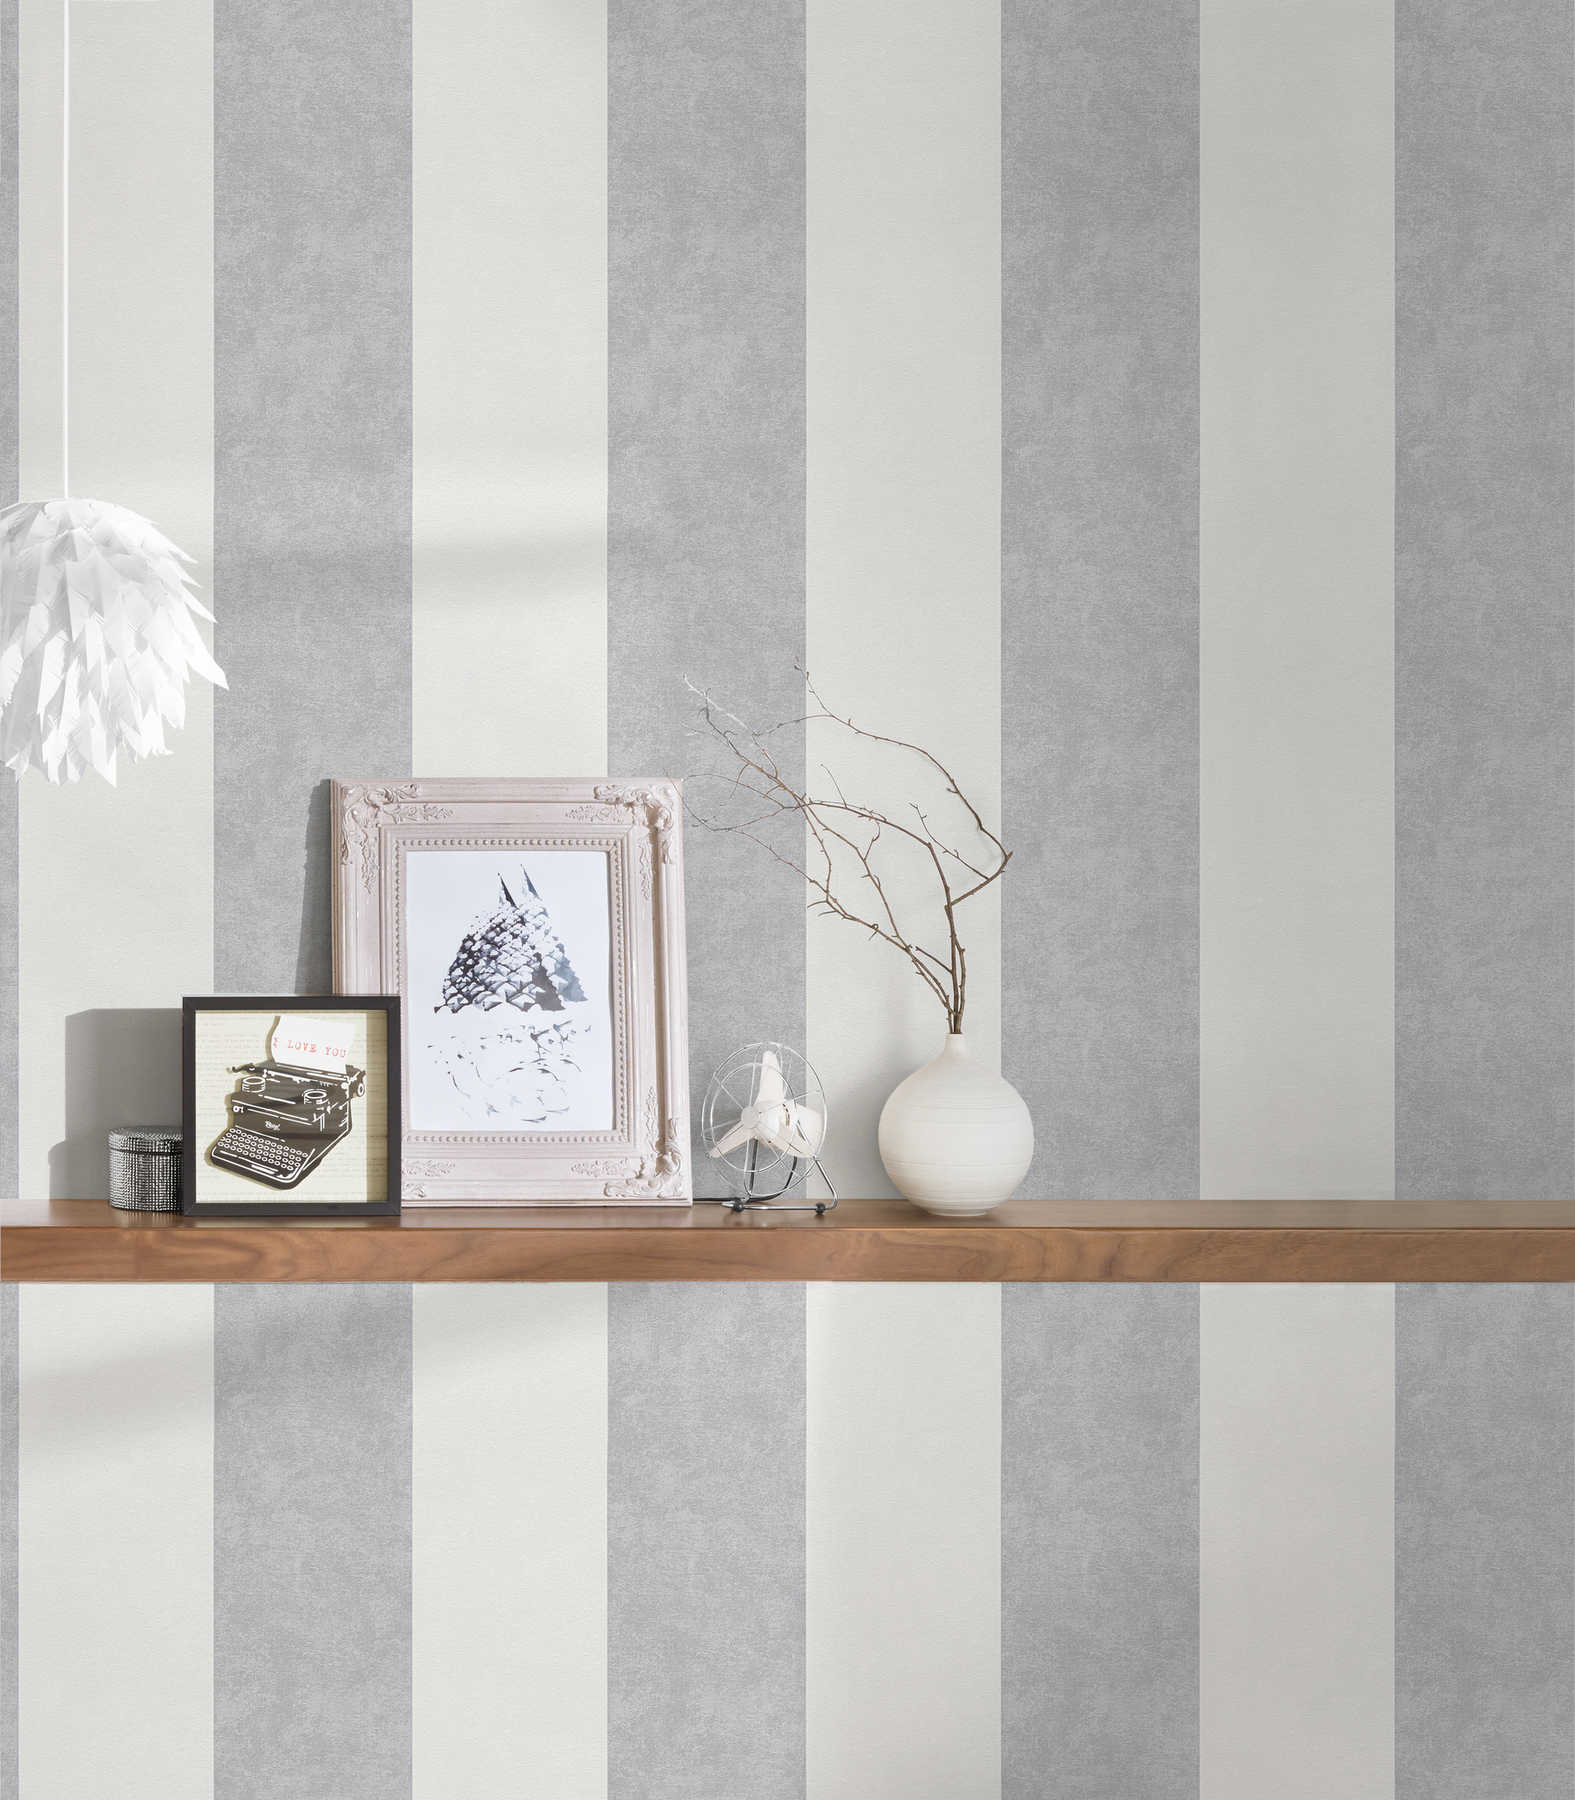             Striped wallpaper with texture pattern - grey
        